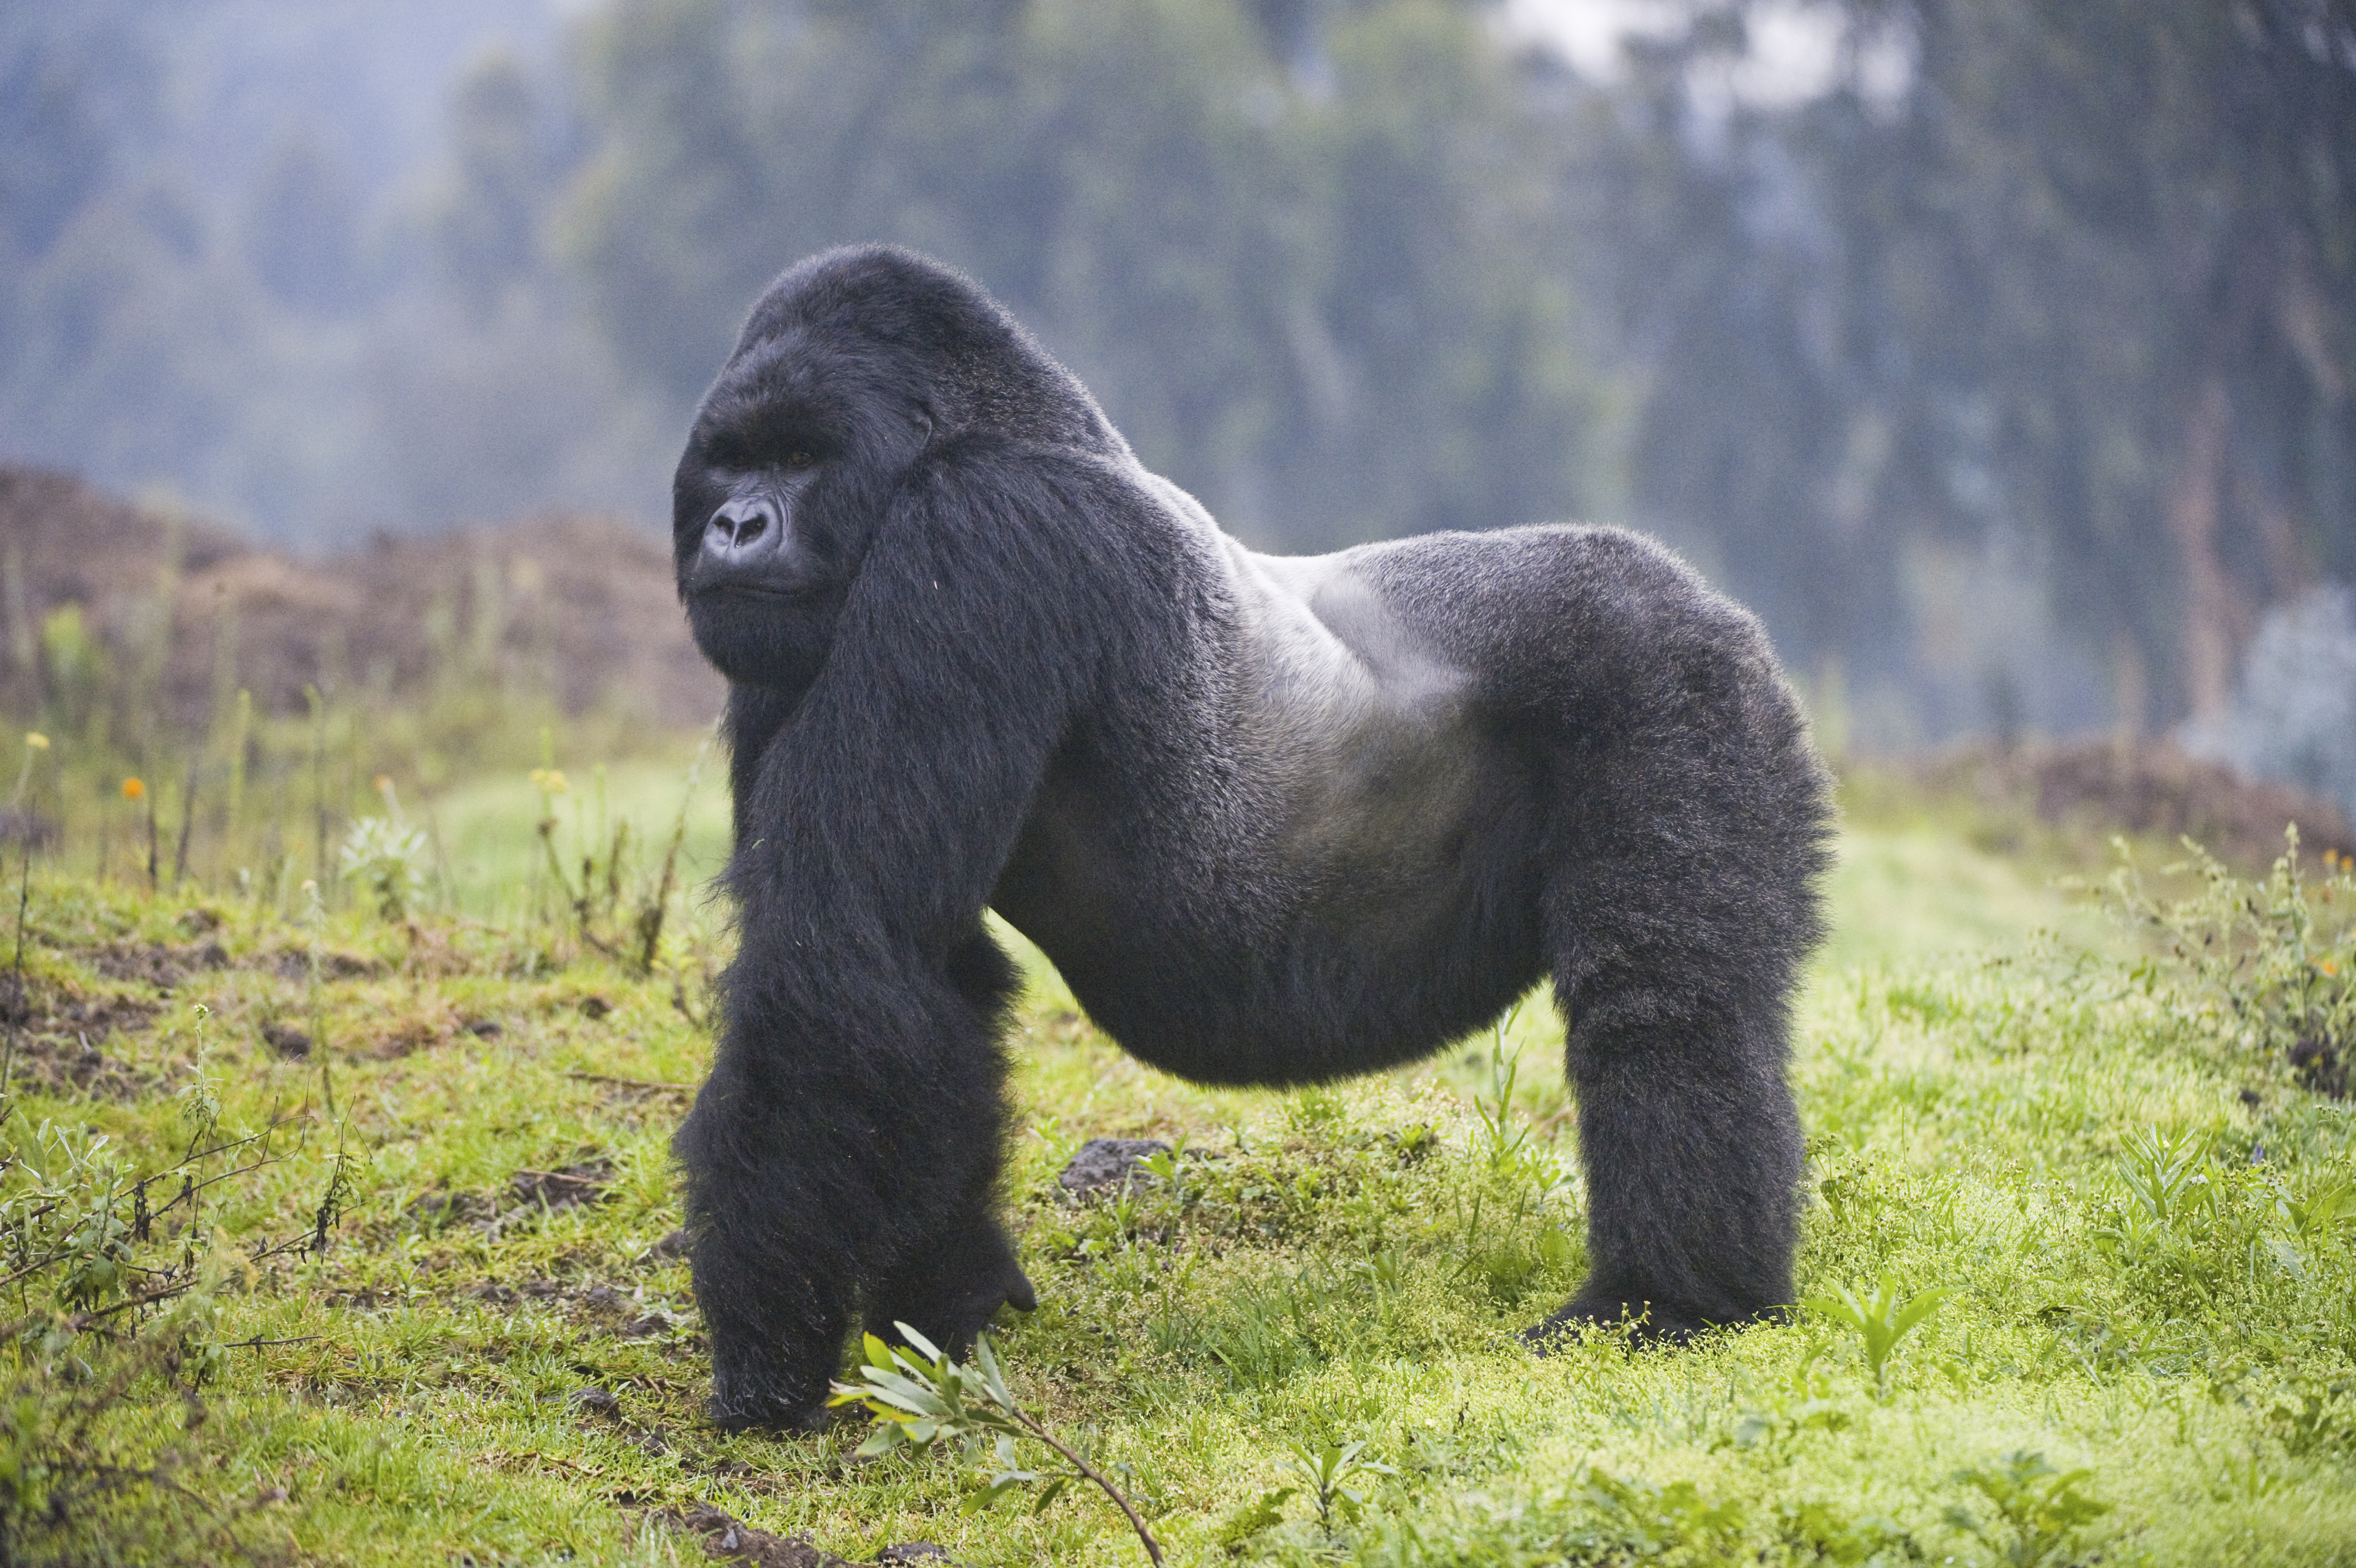 Gorilla guide: where they live, diet, and conservation - Discover